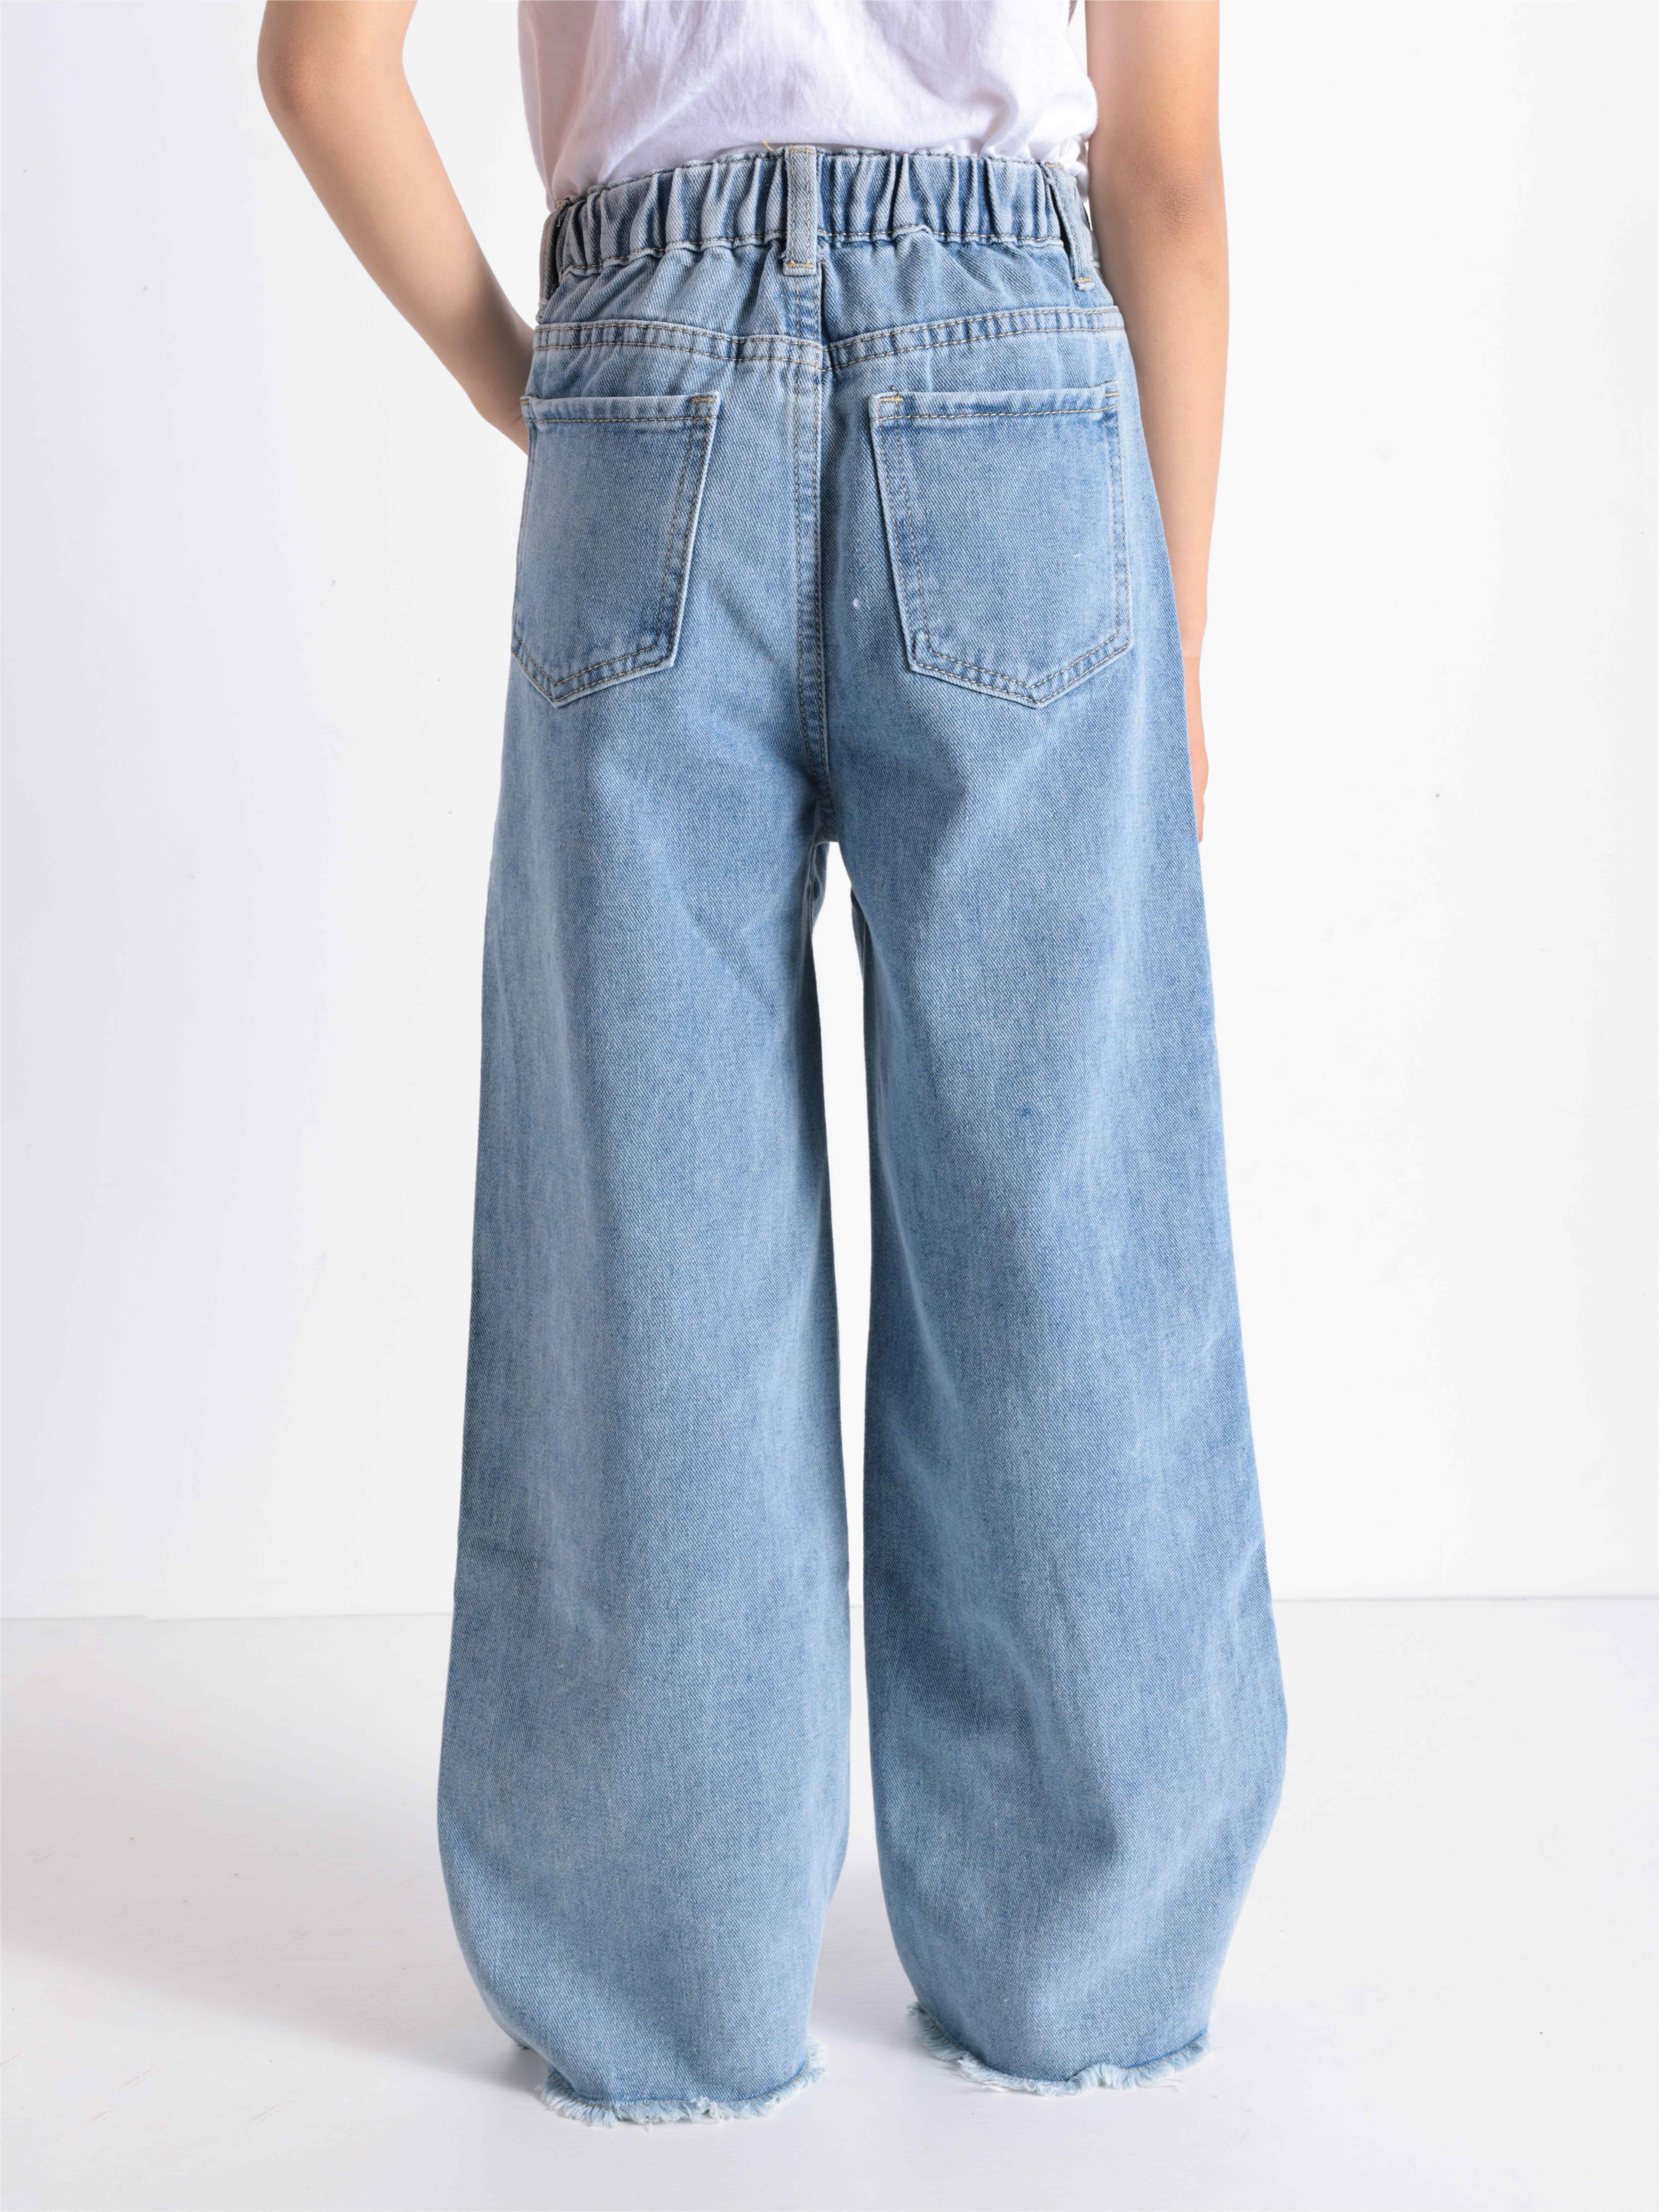 Cheap Girls Jeans Wide Leg Pants Straight Cotton Children Loose Jeans  Ripped Denim Trousers Fashion Kid Big Girls Clothing